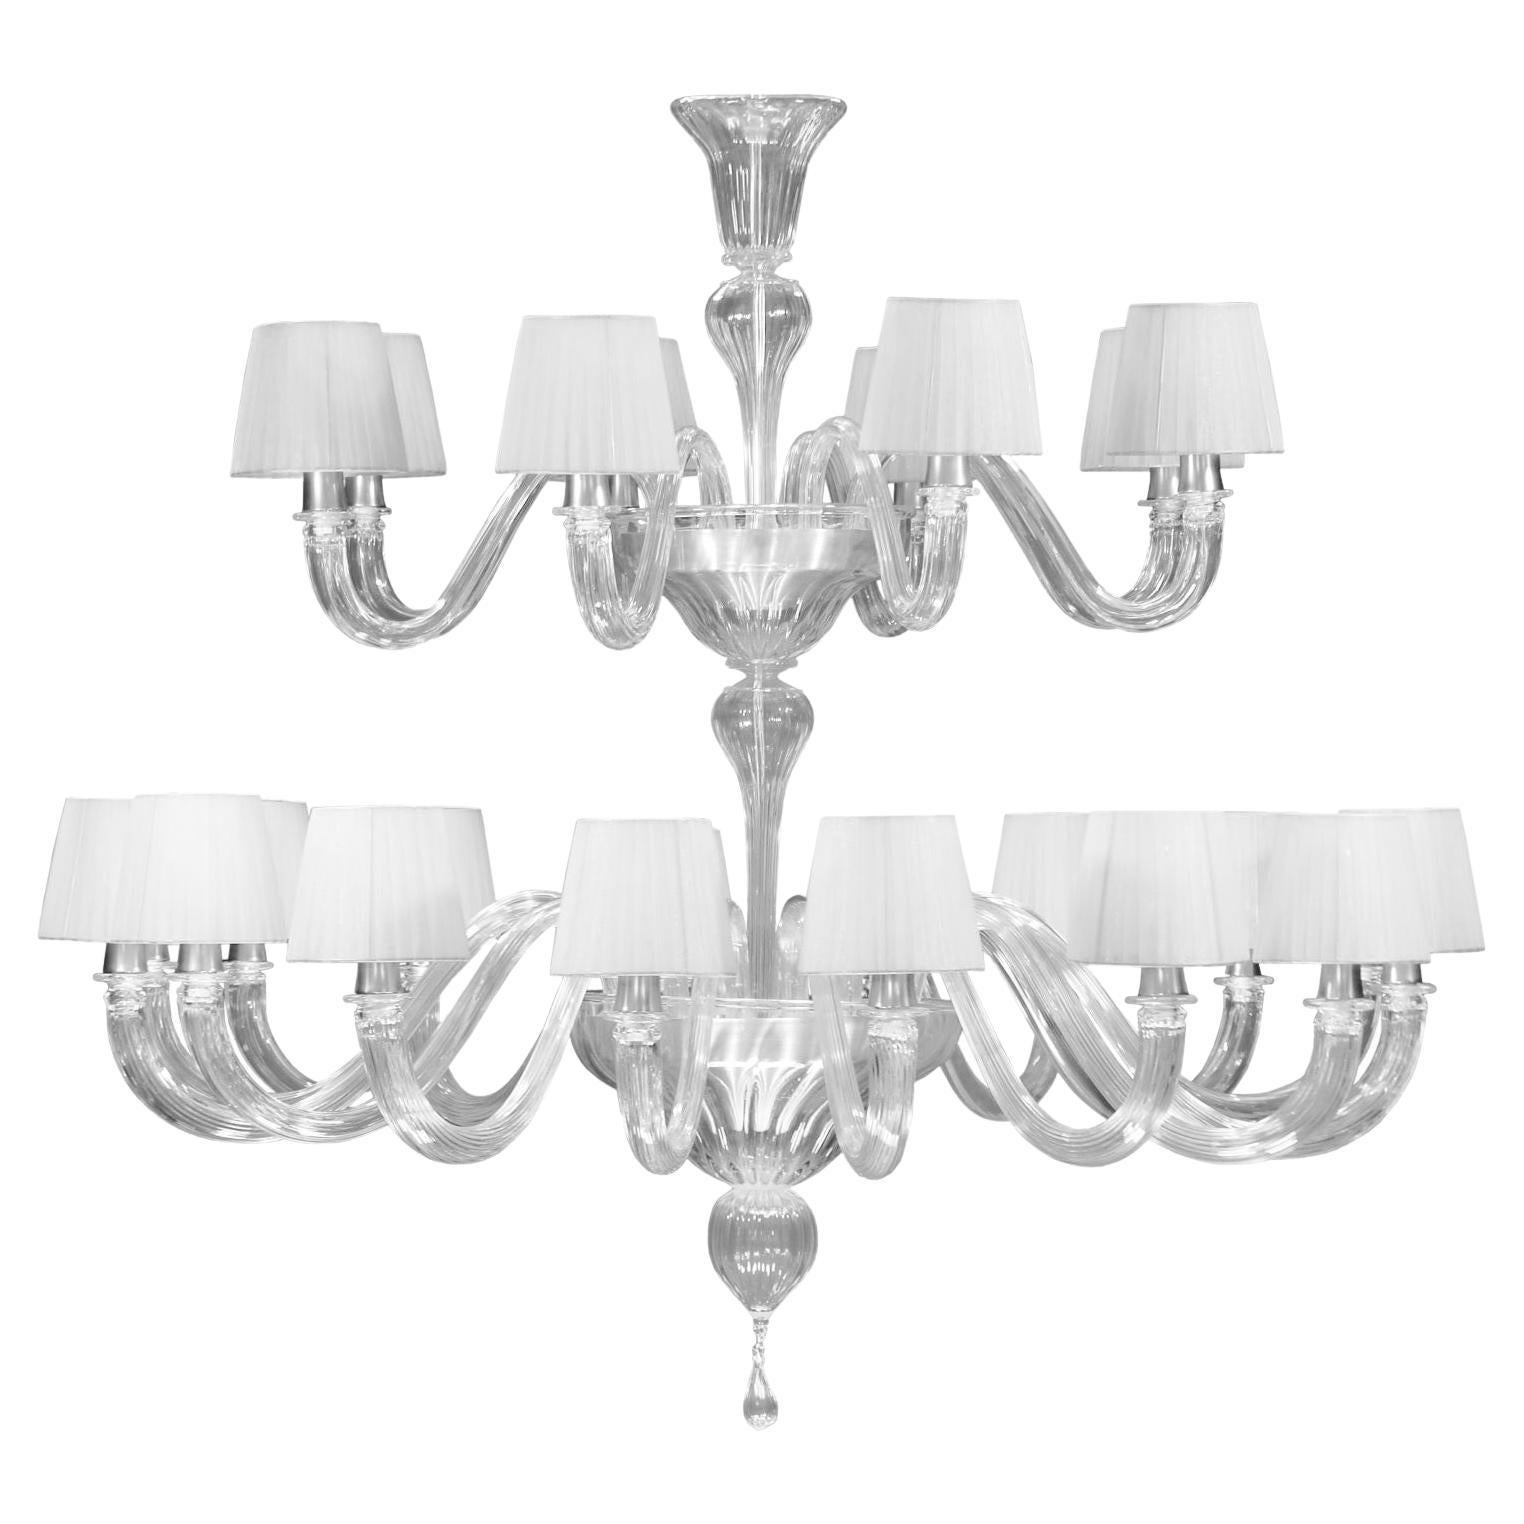 Chandelier 16+8 Arms Crystal Murano Glass Handmade Lampshades by Multiforme